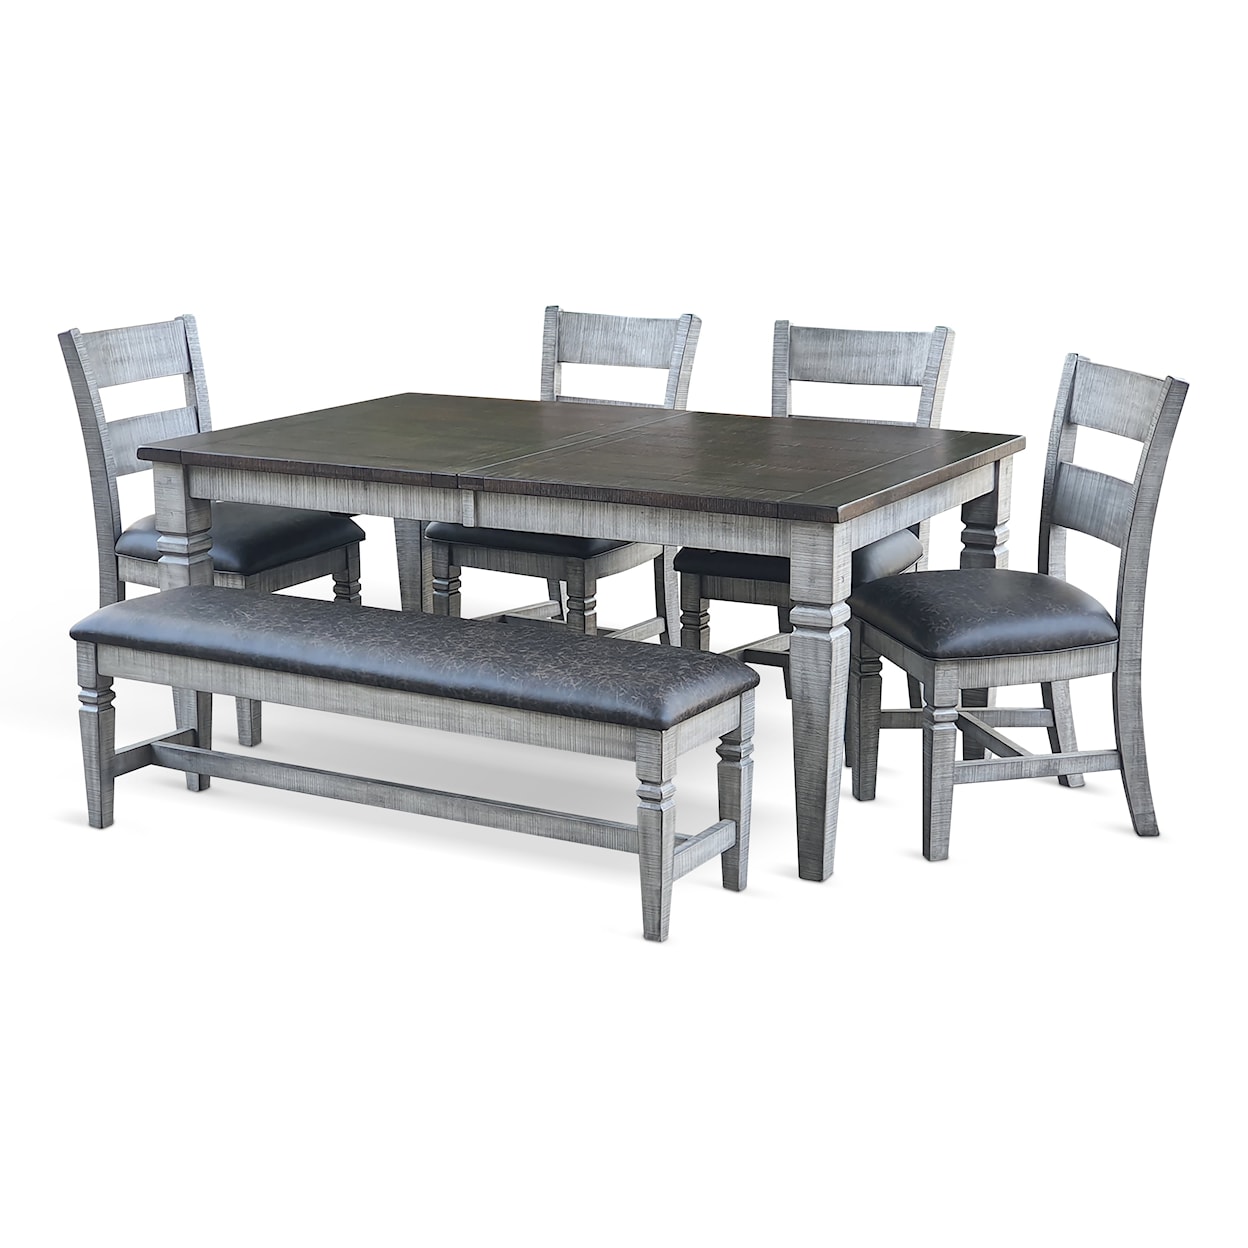 Sunny Designs Homestead Hills Extendable Dining Table